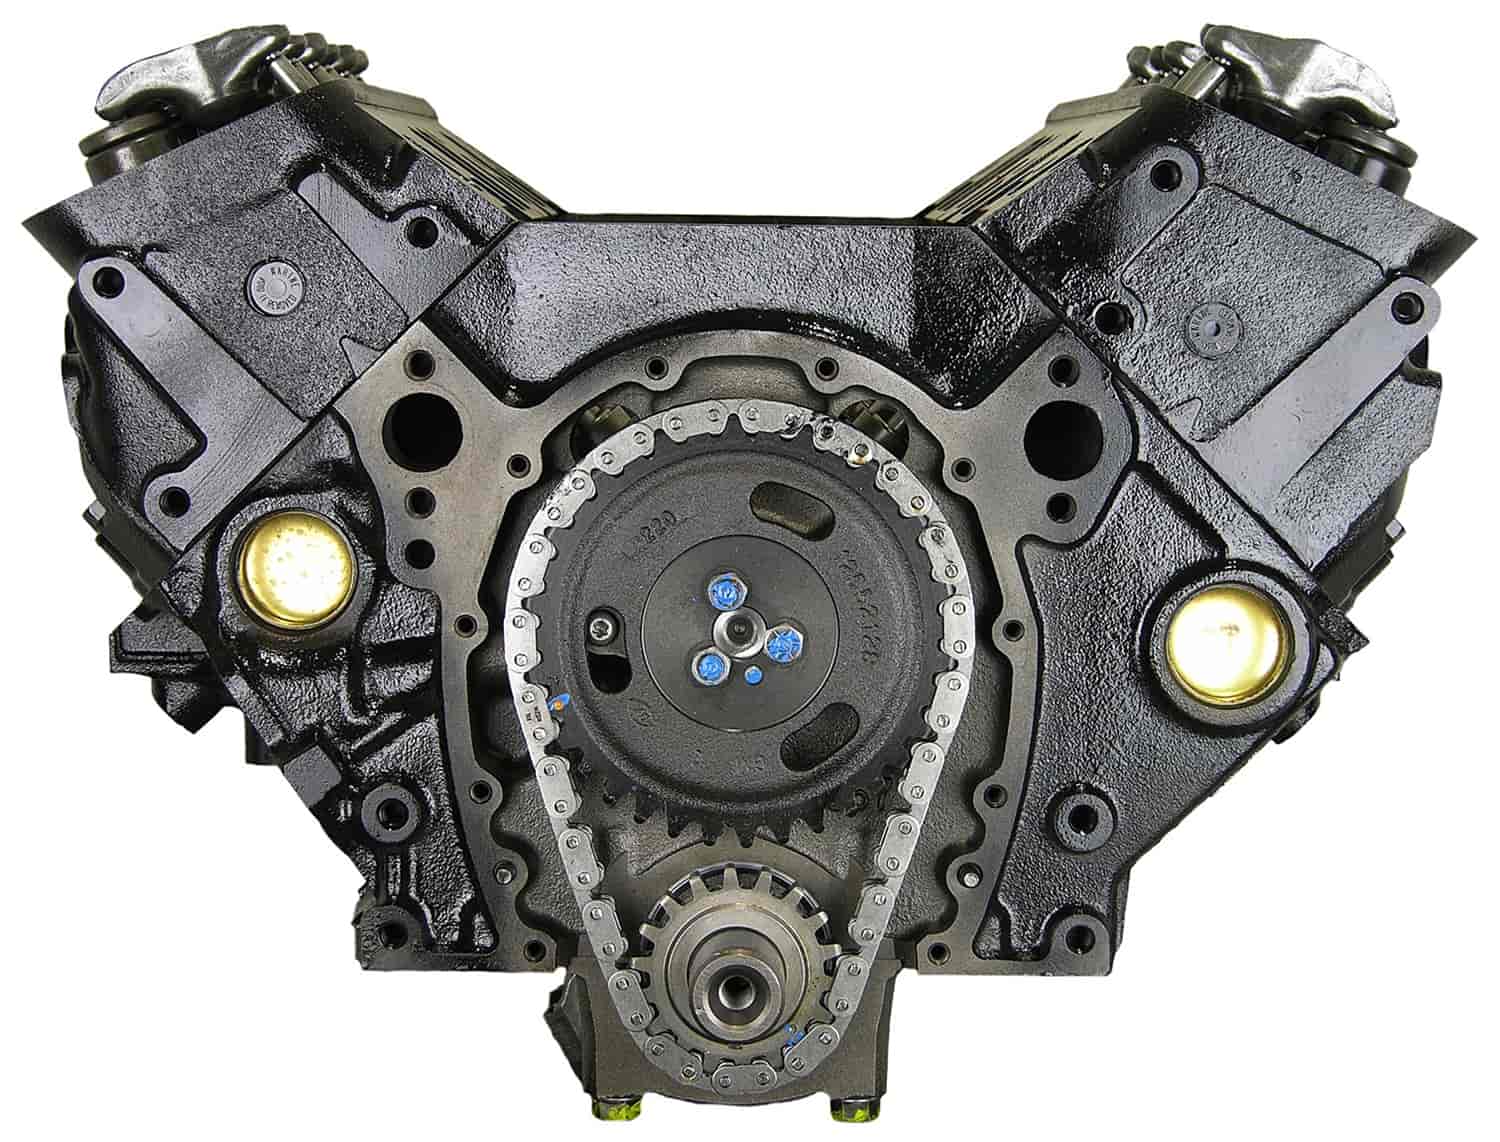 Remanufactured Crate Engine for Marine Applications with 1992-1997 Chevy 4.3L V6